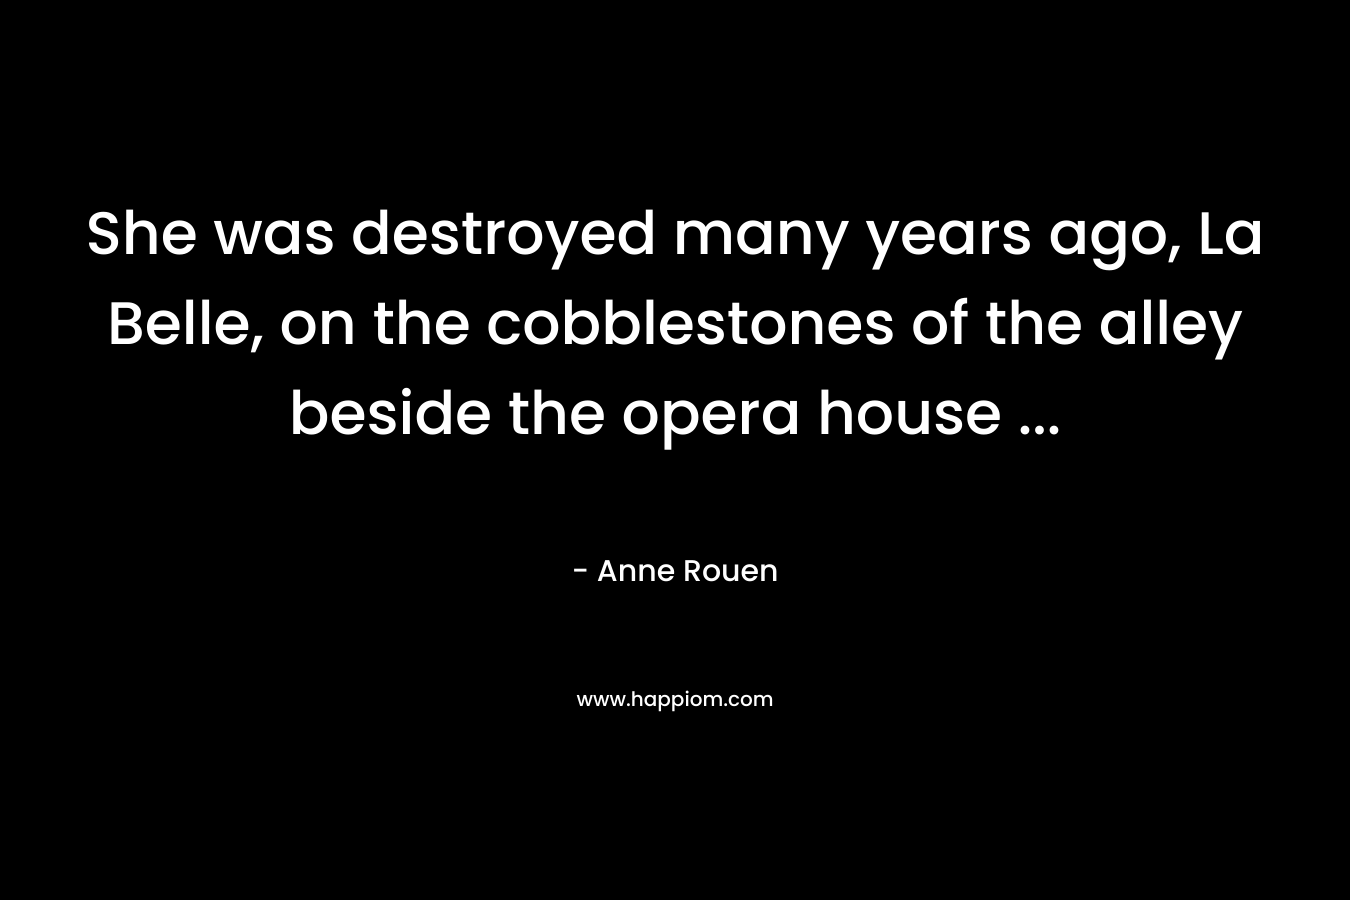 She was destroyed many years ago, La Belle, on the cobblestones of the alley beside the opera house … – Anne Rouen